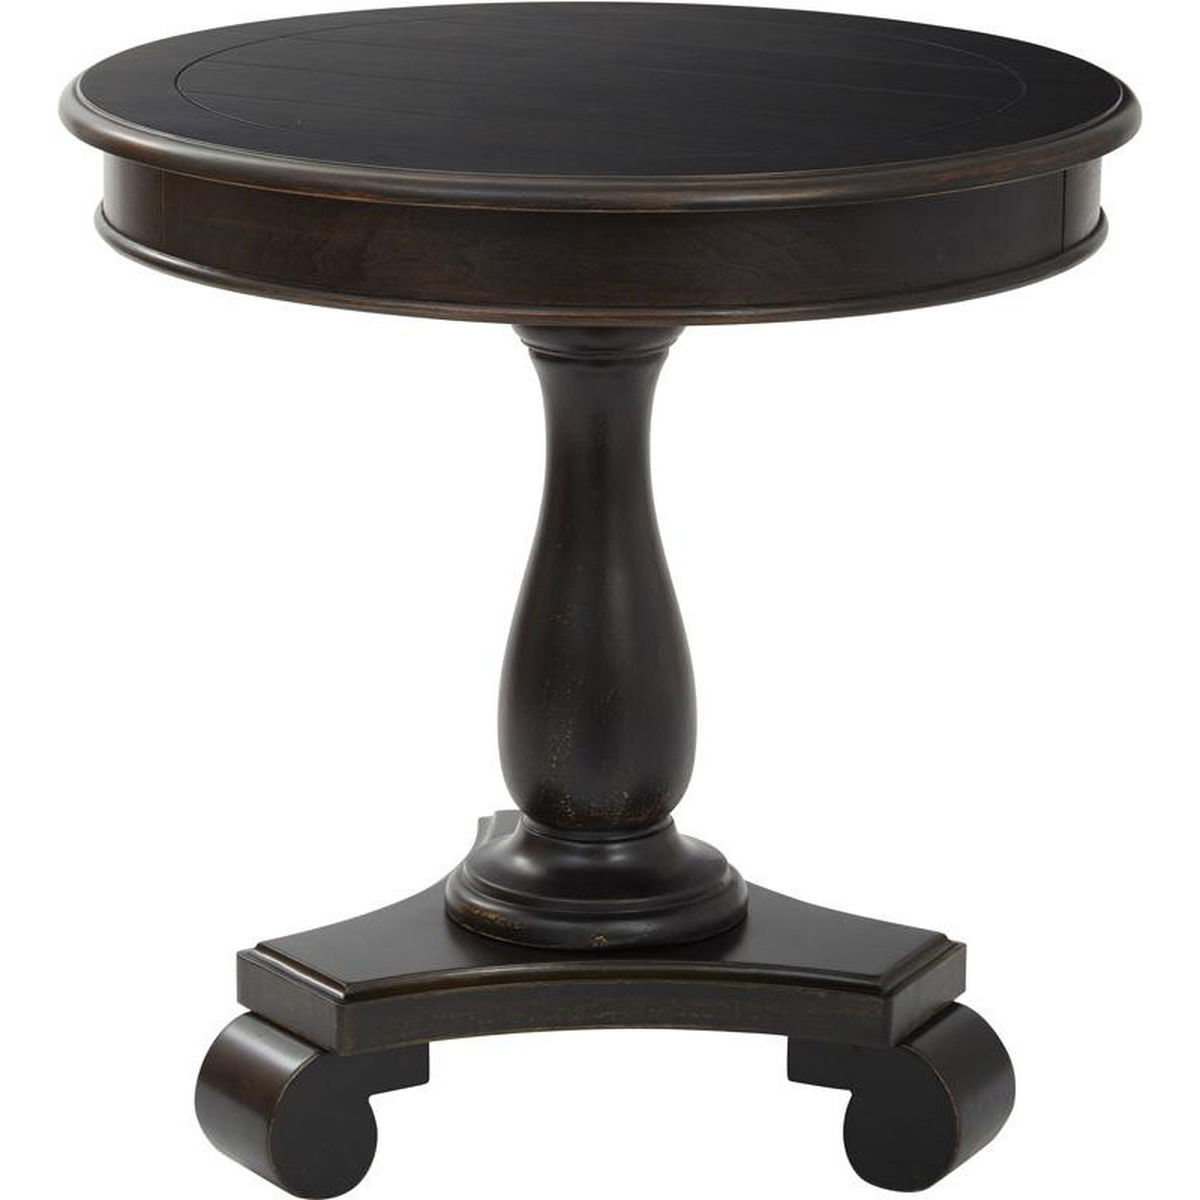 avalon round accent table avlat bizchair office star products black our inspired bassett antique finish now imitation furniture high top patio with umbrella wooden outdoor chairs